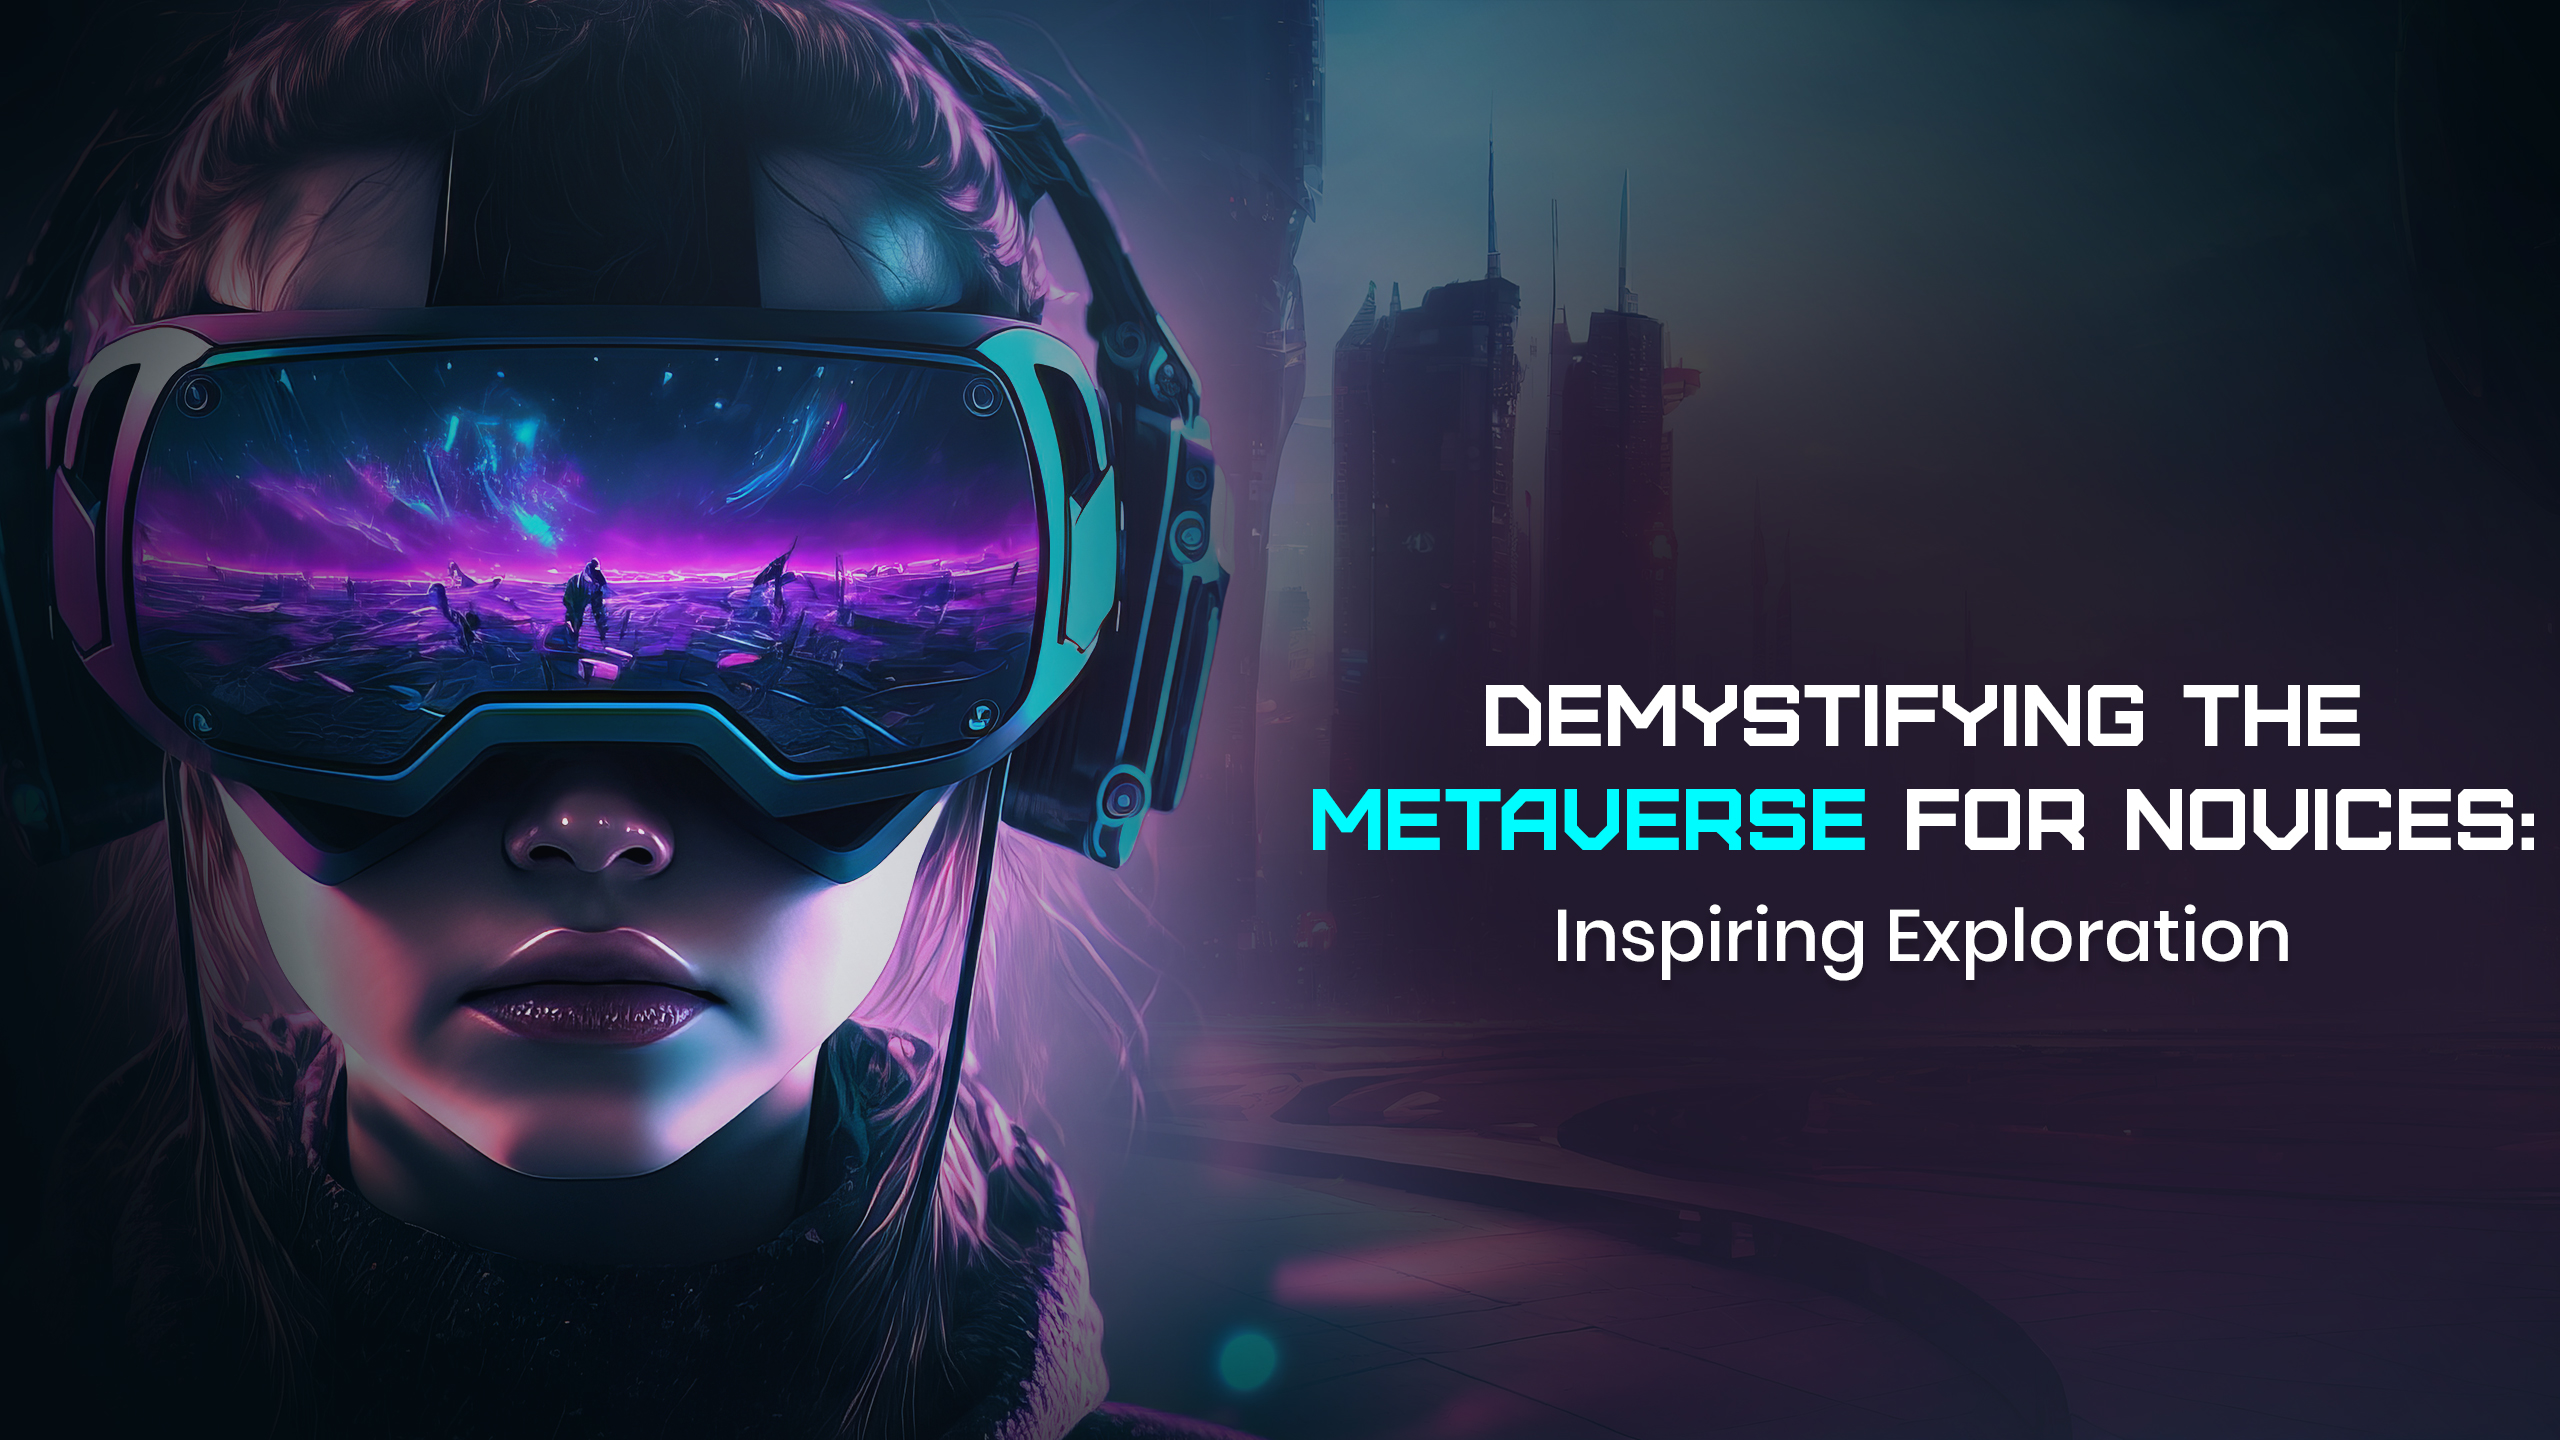 Demystifying the Metaverse for Novices by Web 3.0 India